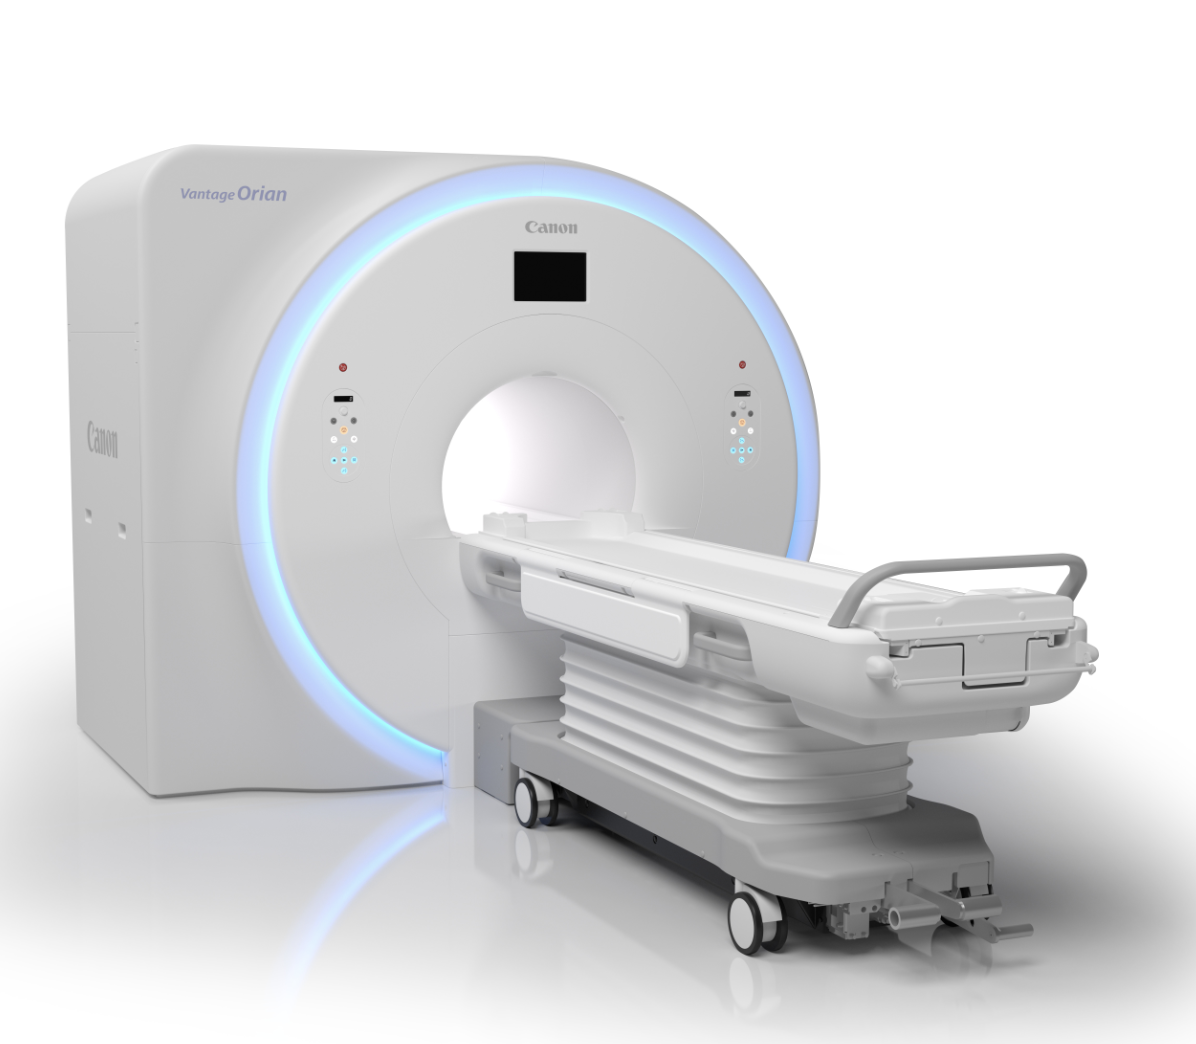 Canon Medical Receives FDA Clearance for Vantage Orian 1.5T MRI